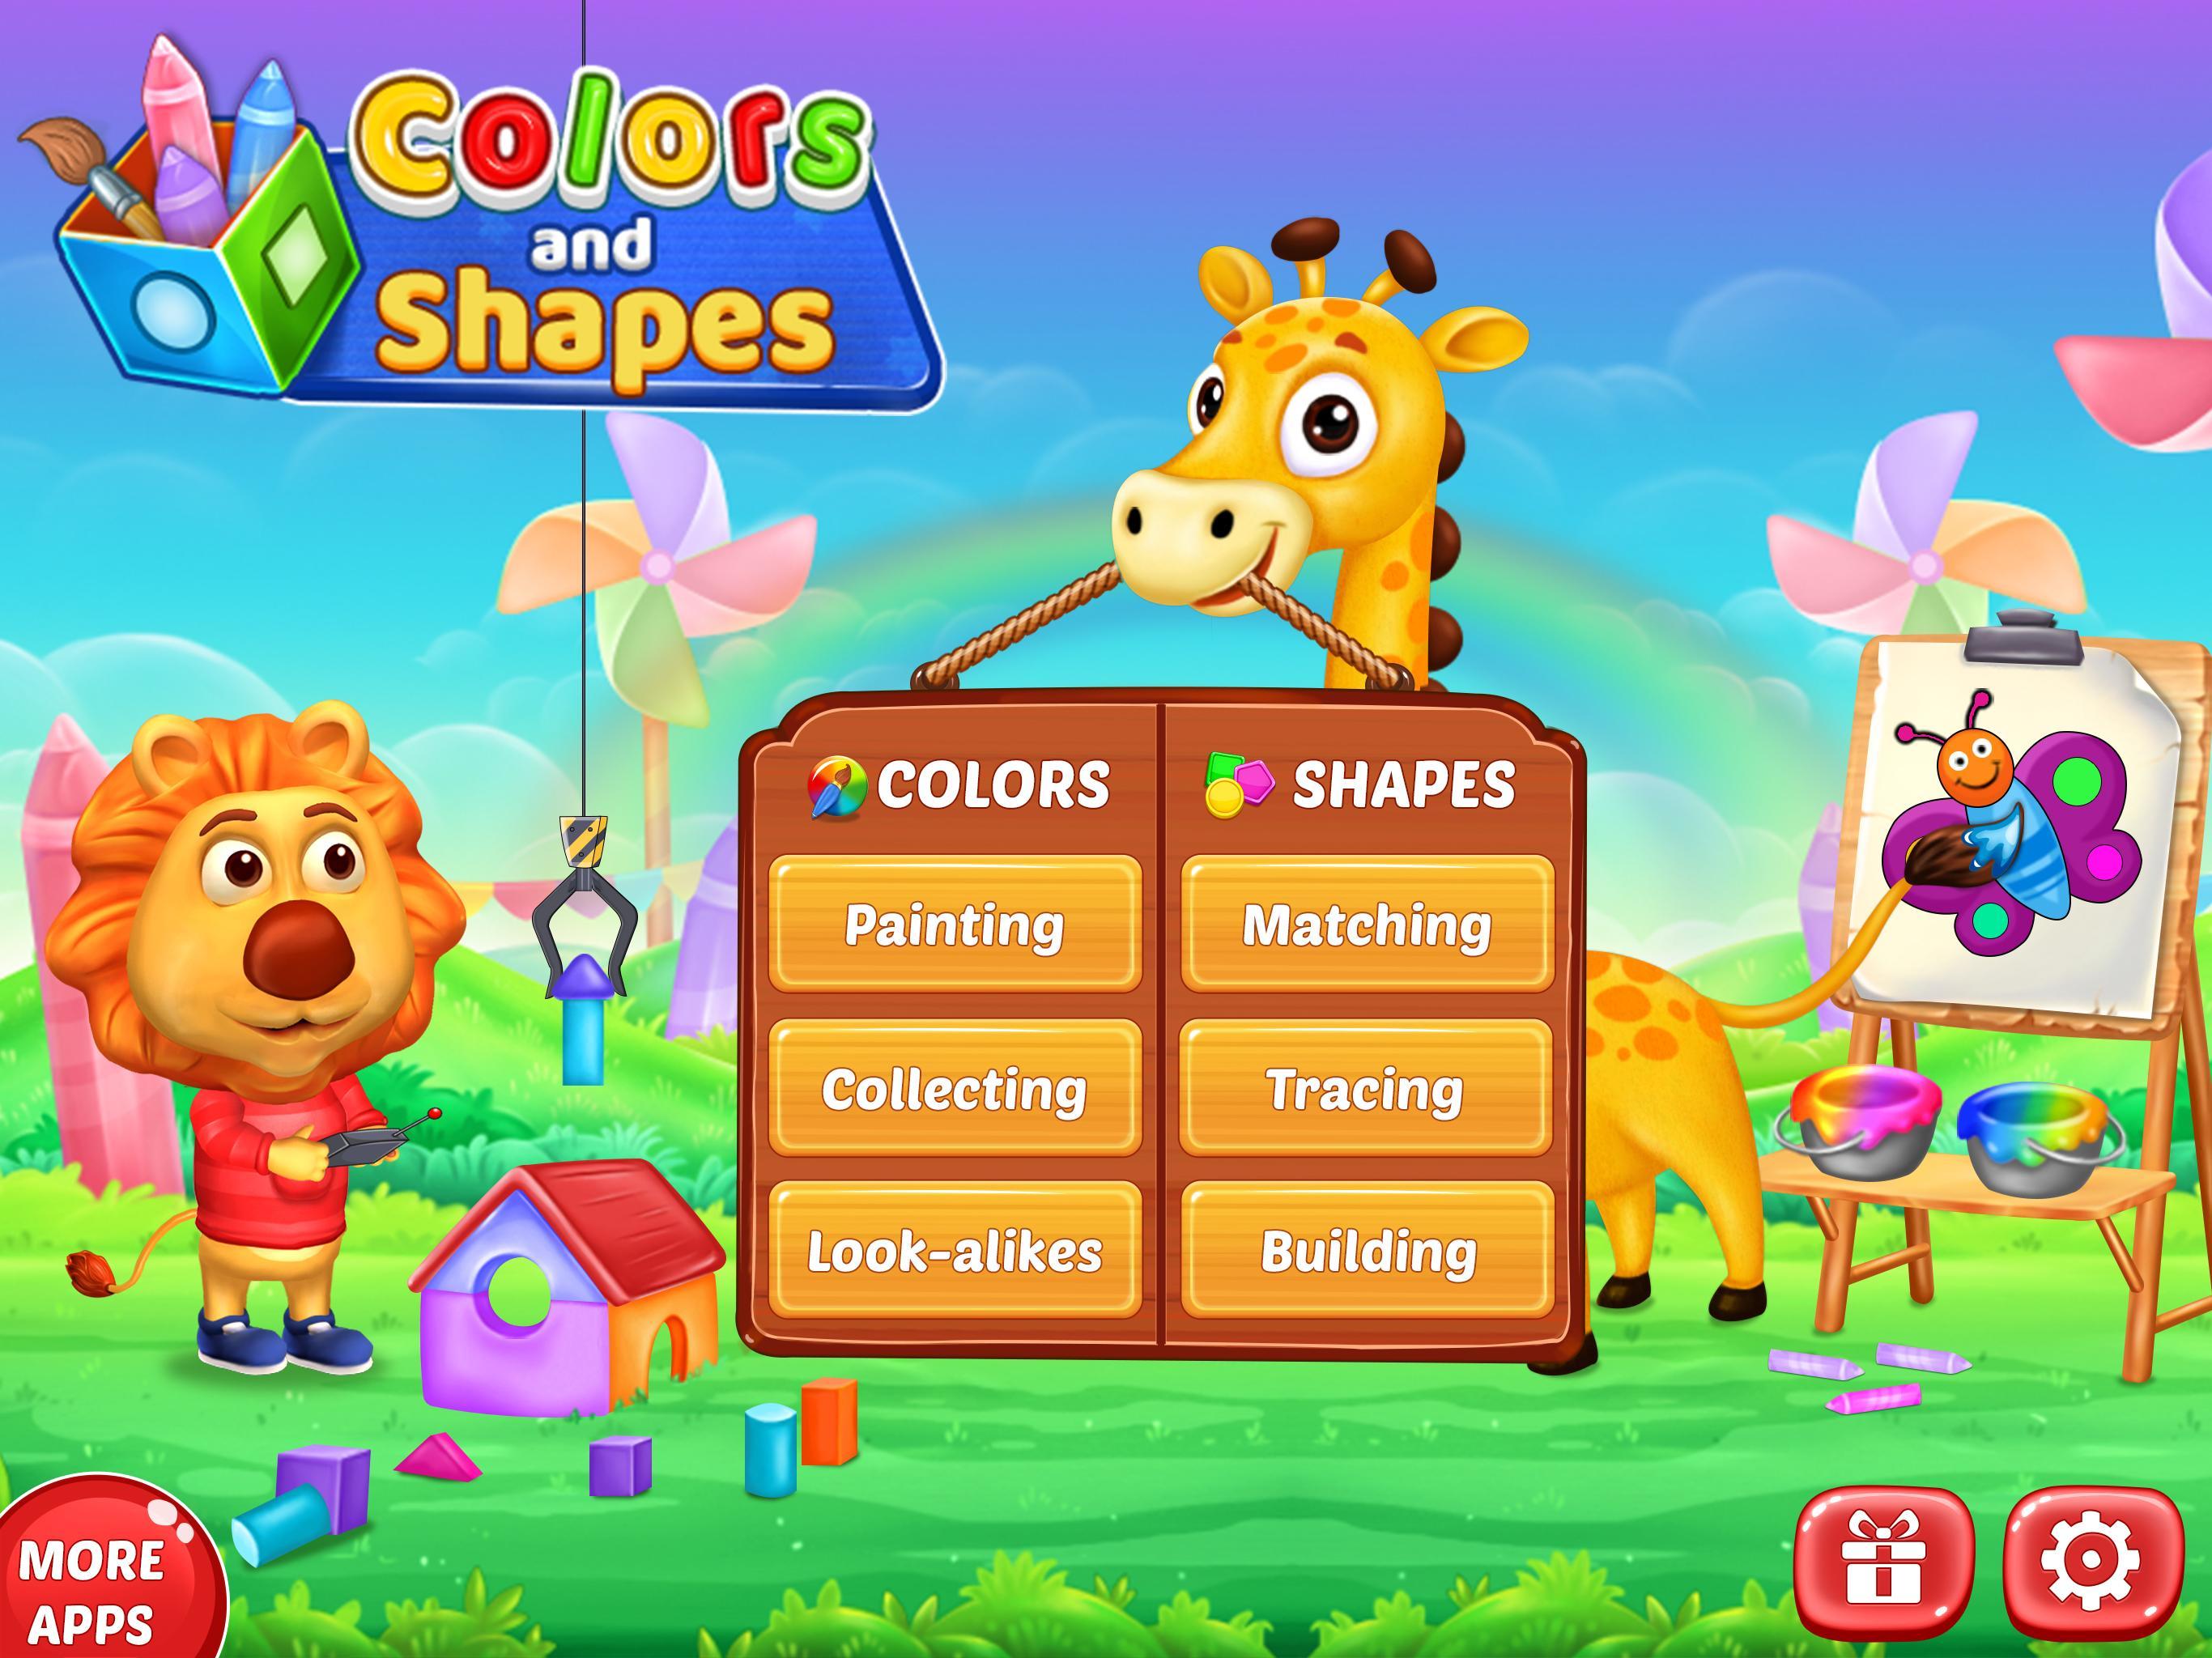 Colors games for kids. Colors игра. Игра Colors for Kids. Игра "цвета". Андроид Shapes_and_Colors.